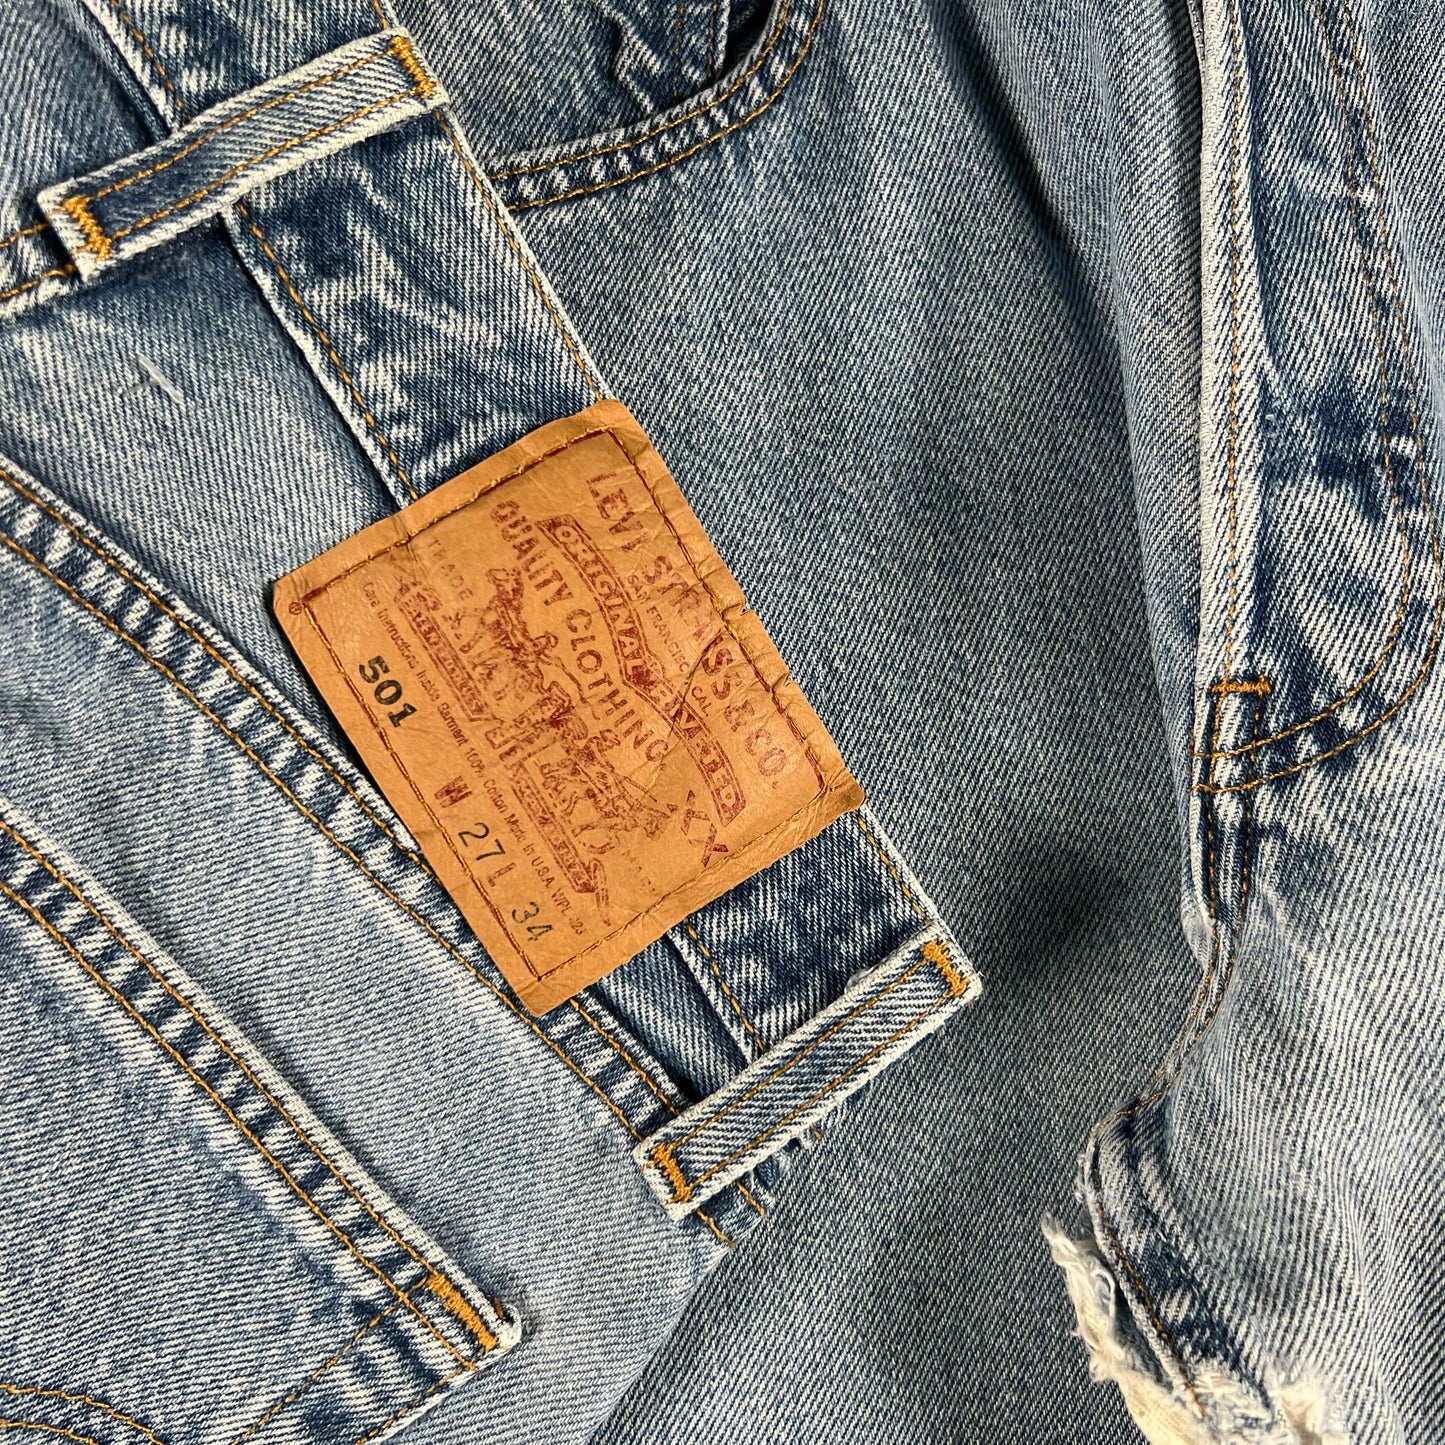 90s Levi's 501 2 Pack-(26/27x33.5)